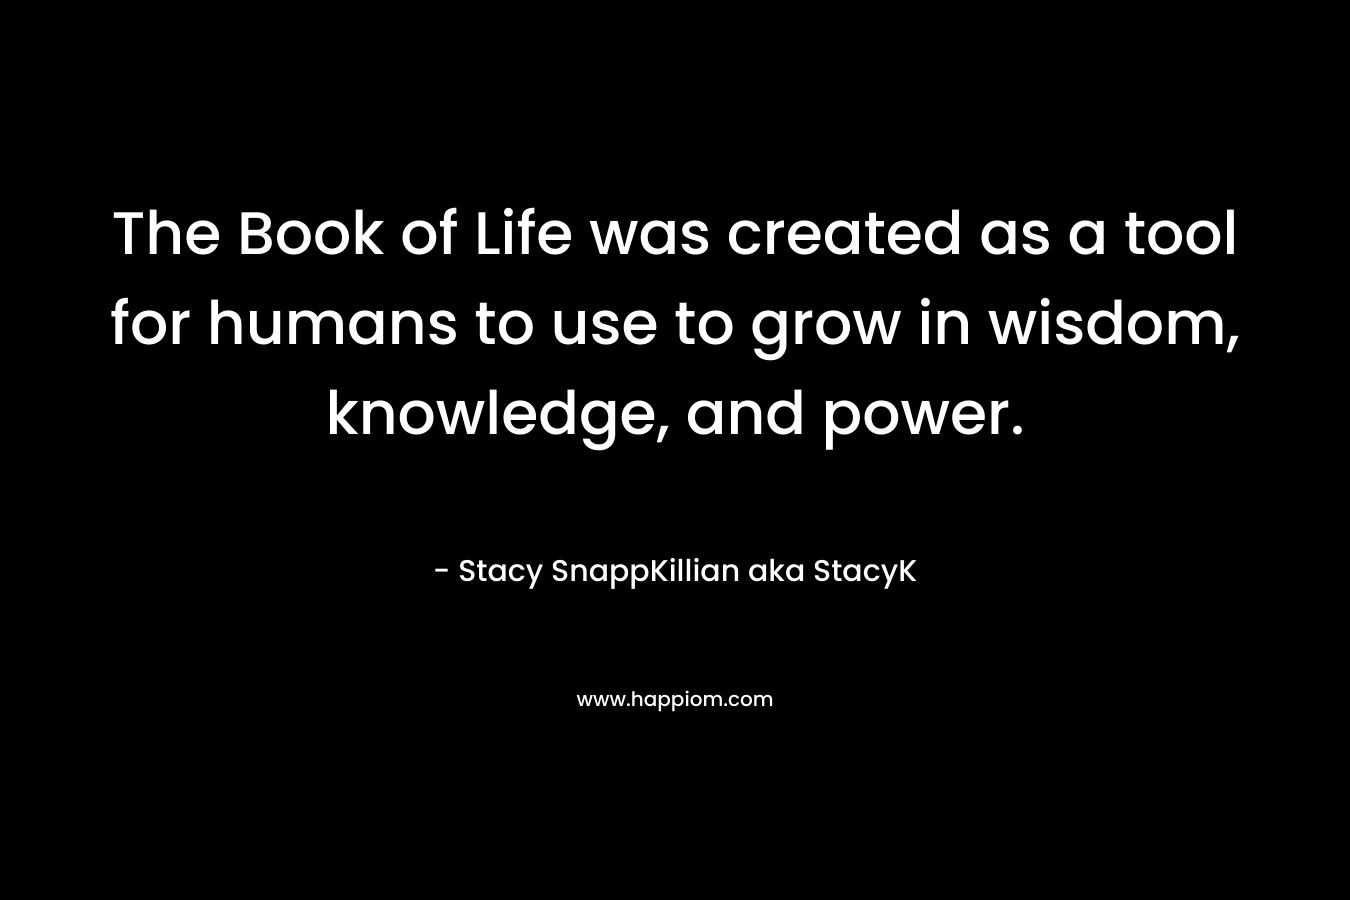 The Book of Life was created as a tool for humans to use to grow in wisdom, knowledge, and power. – Stacy SnappKillian aka StacyK